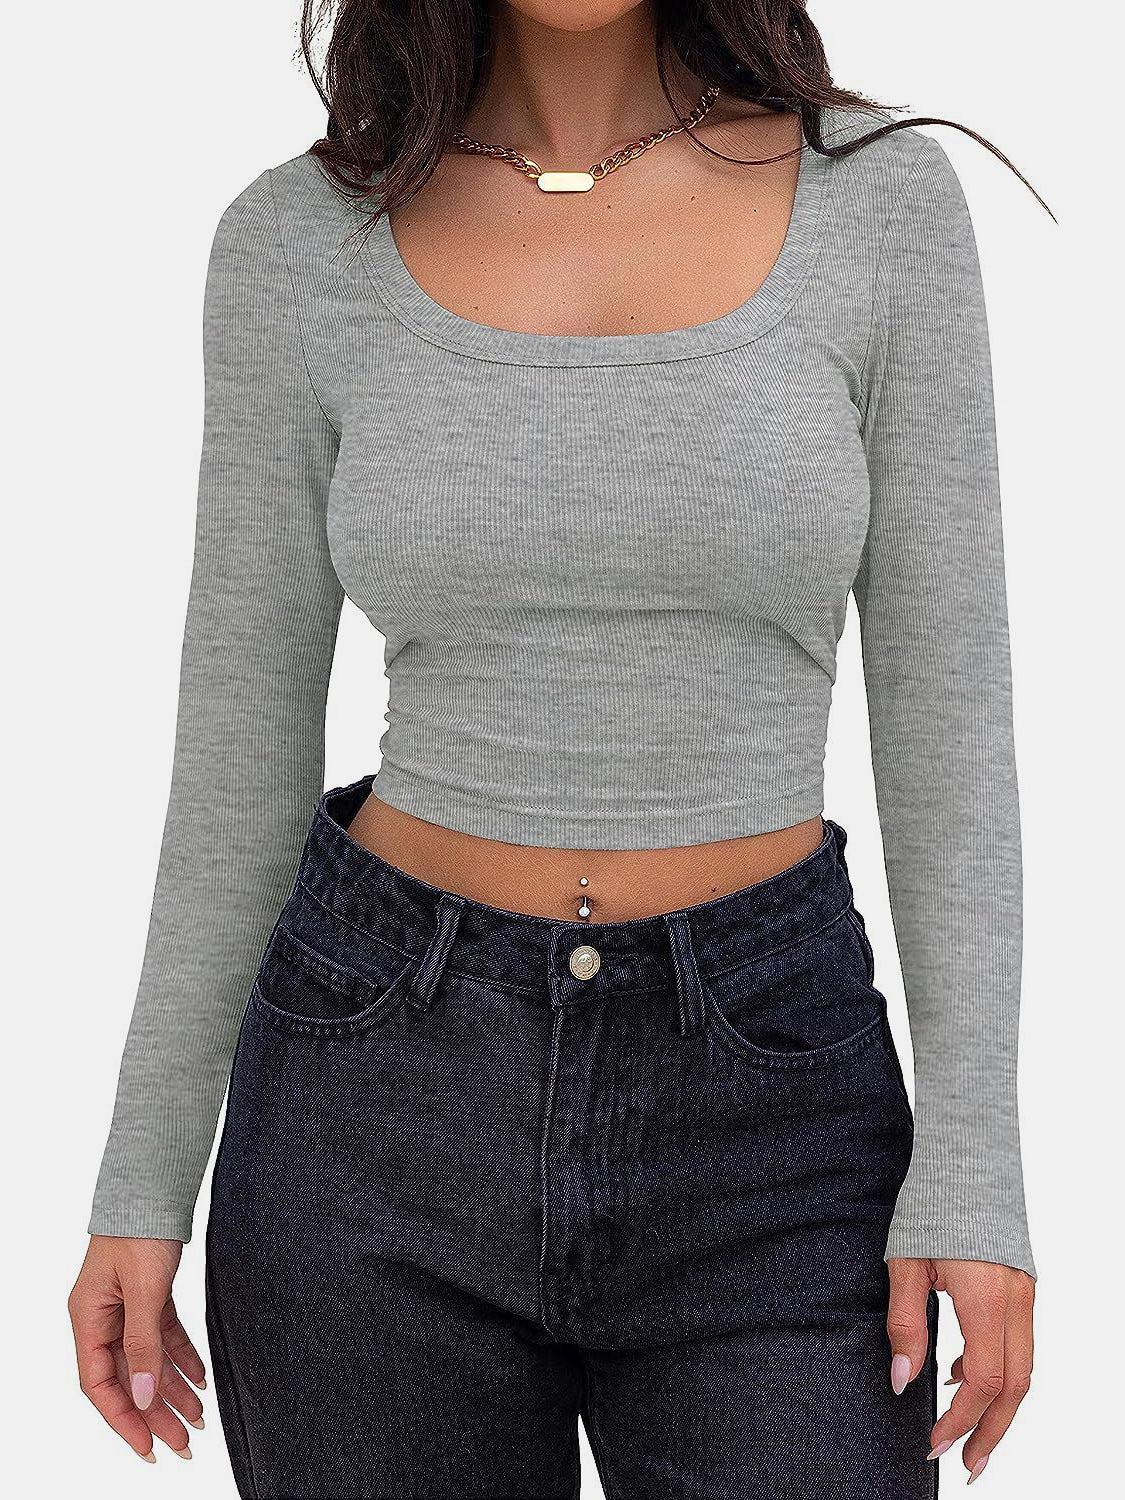 a woman wearing a grey crop top and jeans